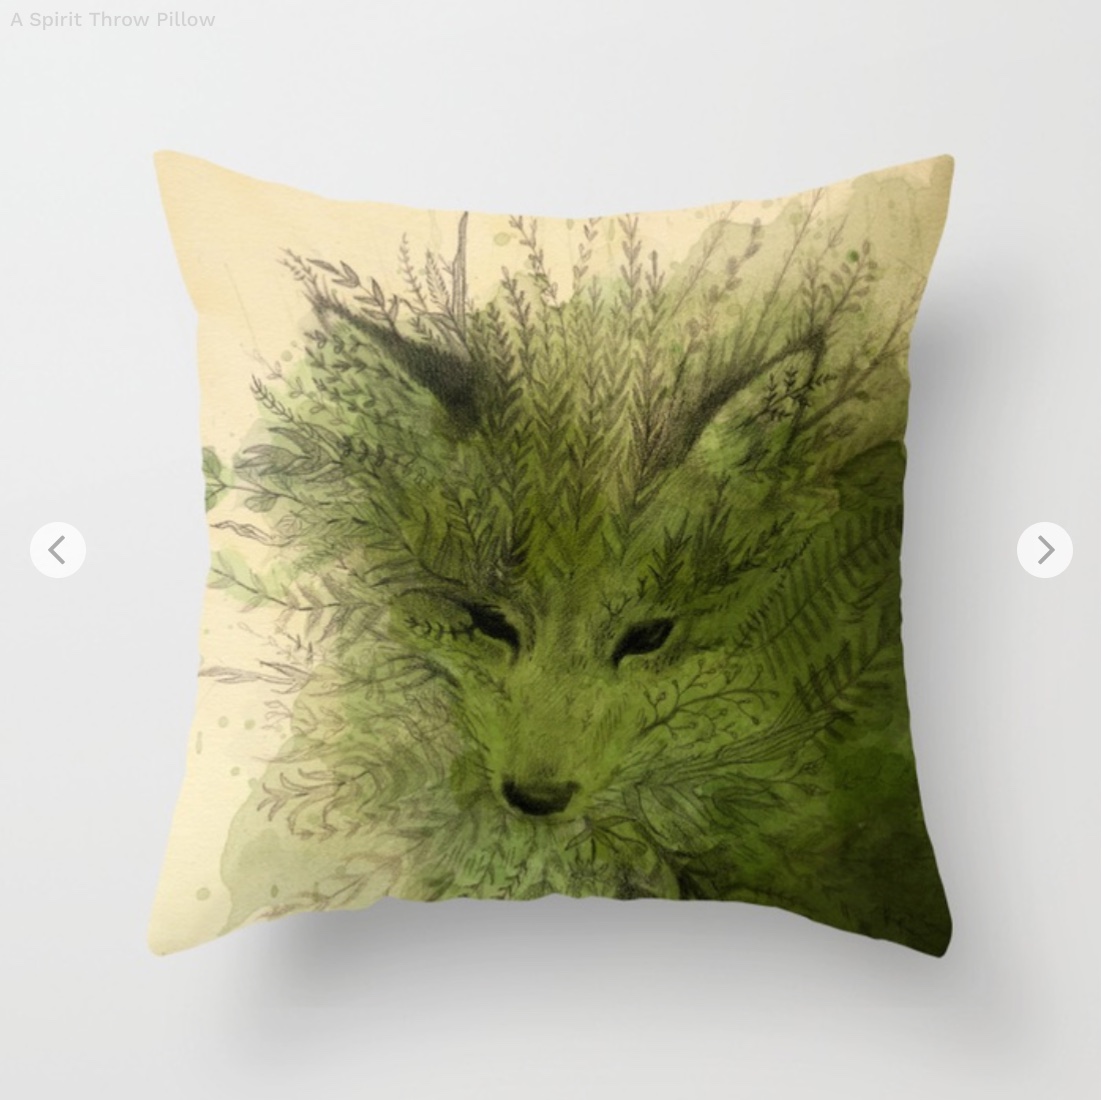 A Spirit Throw Pillow by leslieevans | Society6
All Green Everything